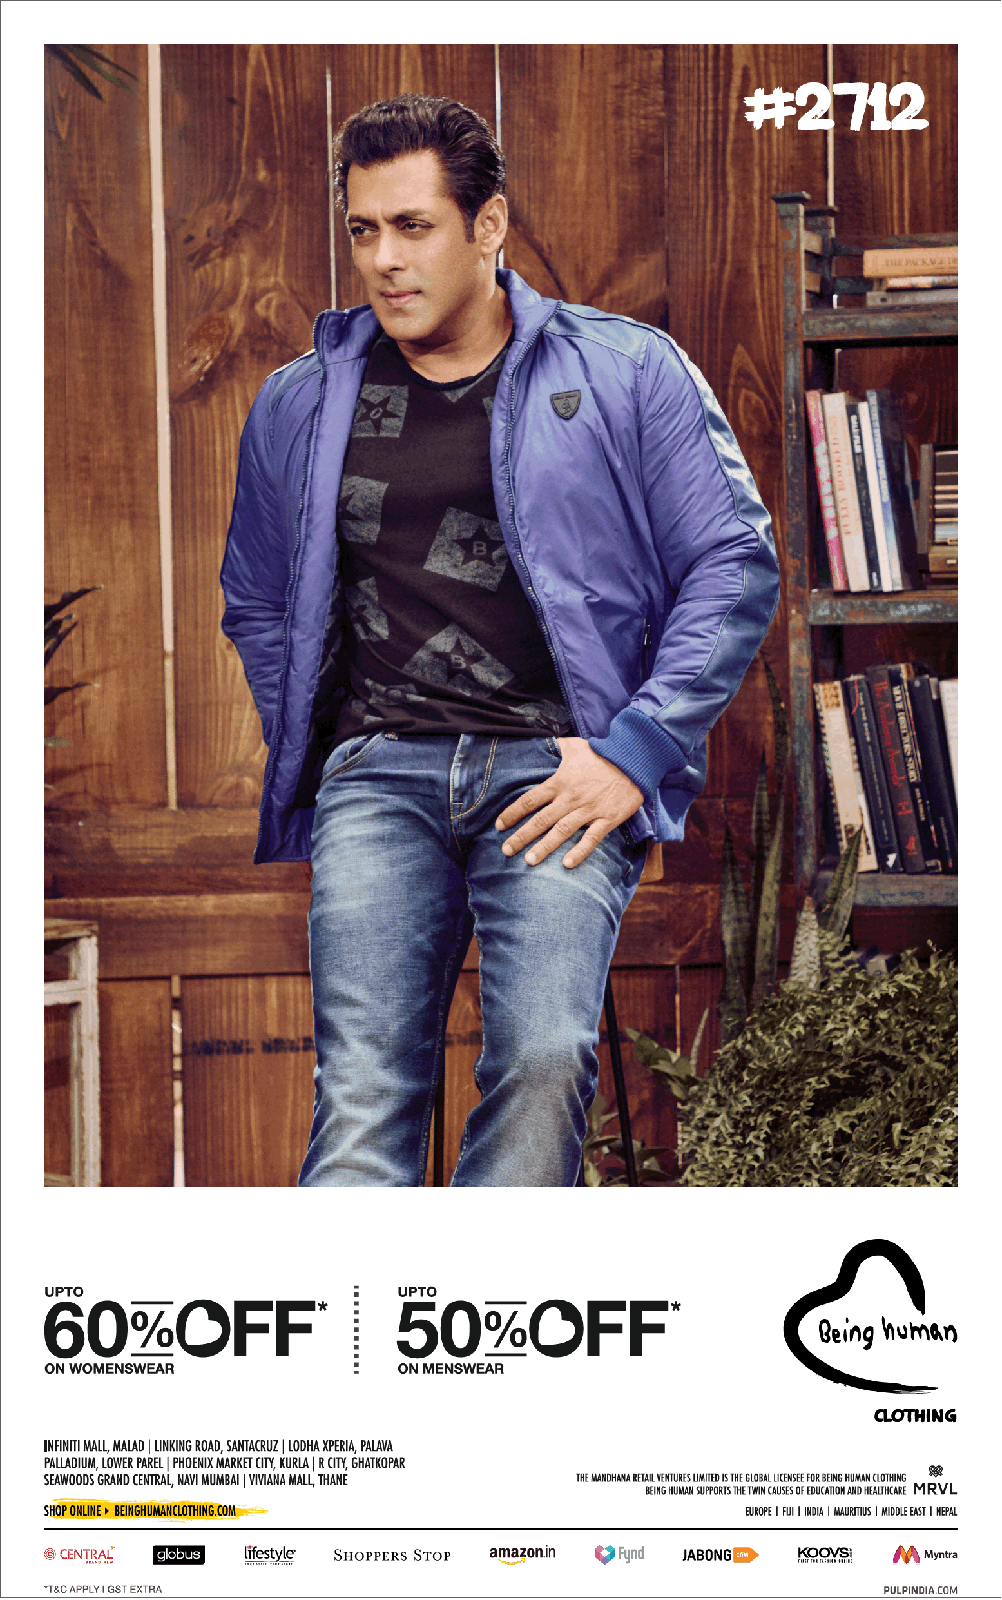 being-human-clothing-upto-60%-off-ad-bombay-times-27-12-2018.png